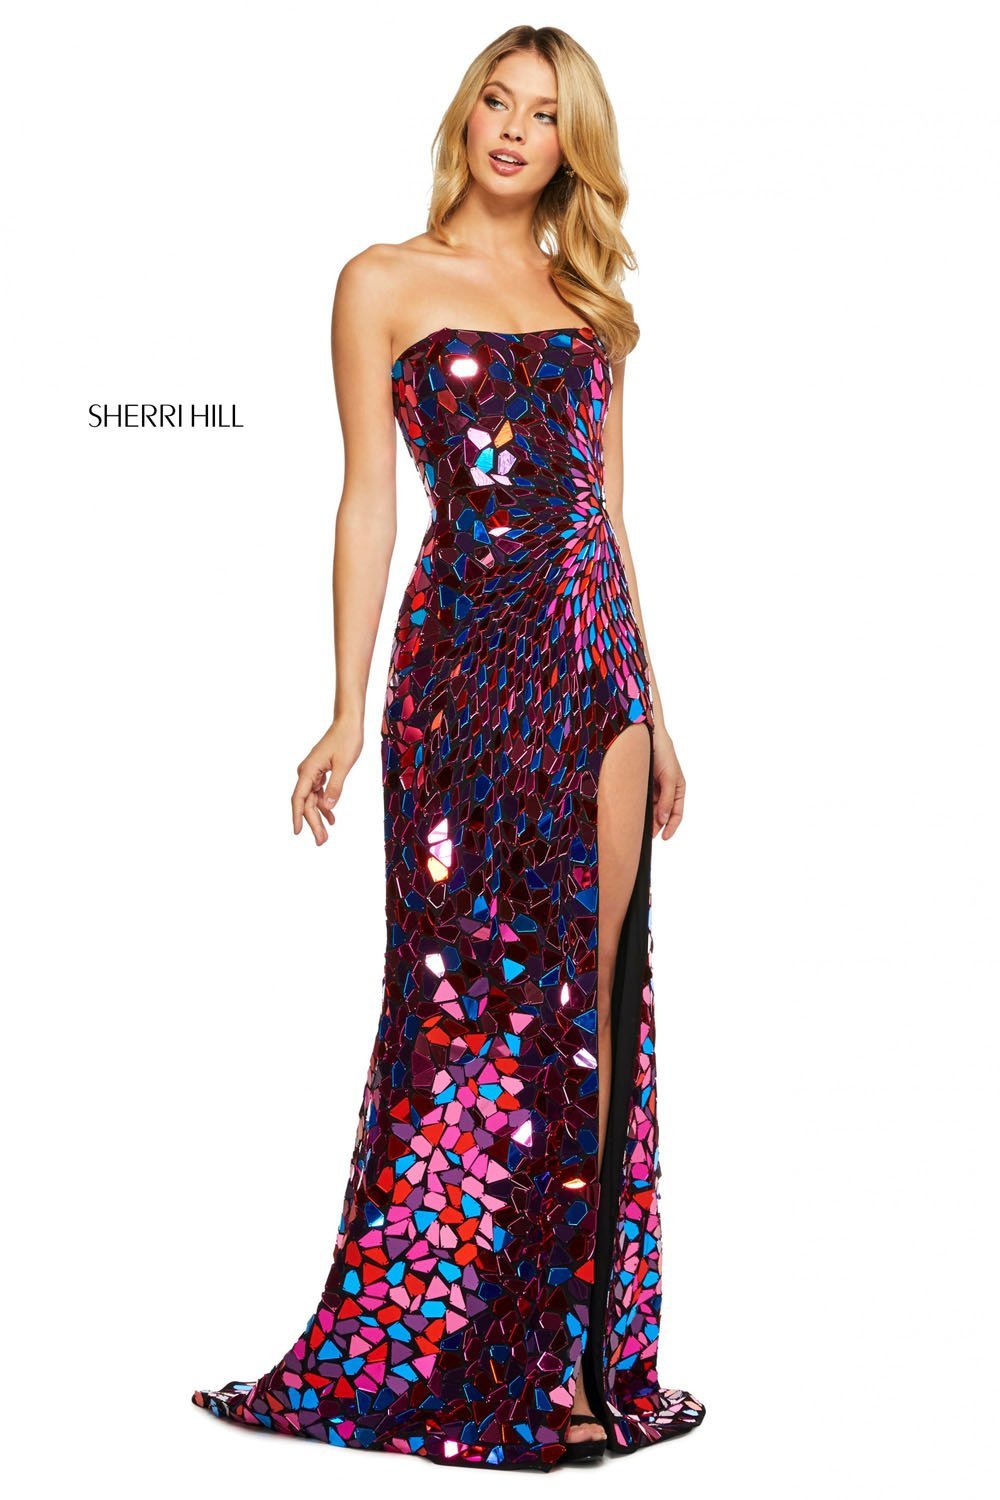 Sherri Hill 53474 dress images in these colors: Black Multi, Black Gold, Black Silver, Silver, Pink.